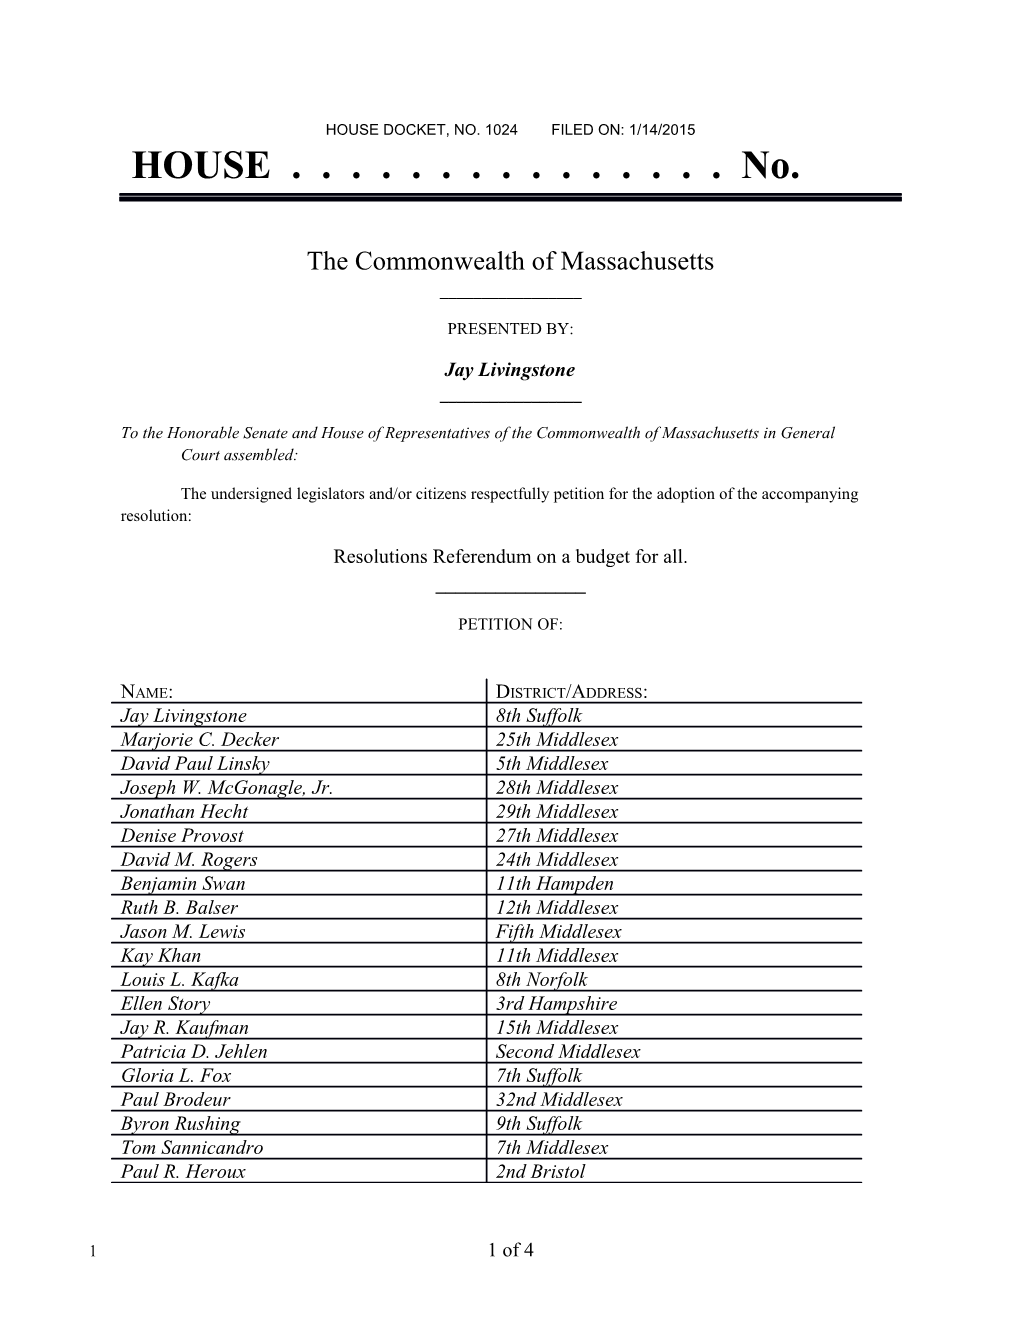 House Docket, No. 1024 Filed On: 1/14/2015